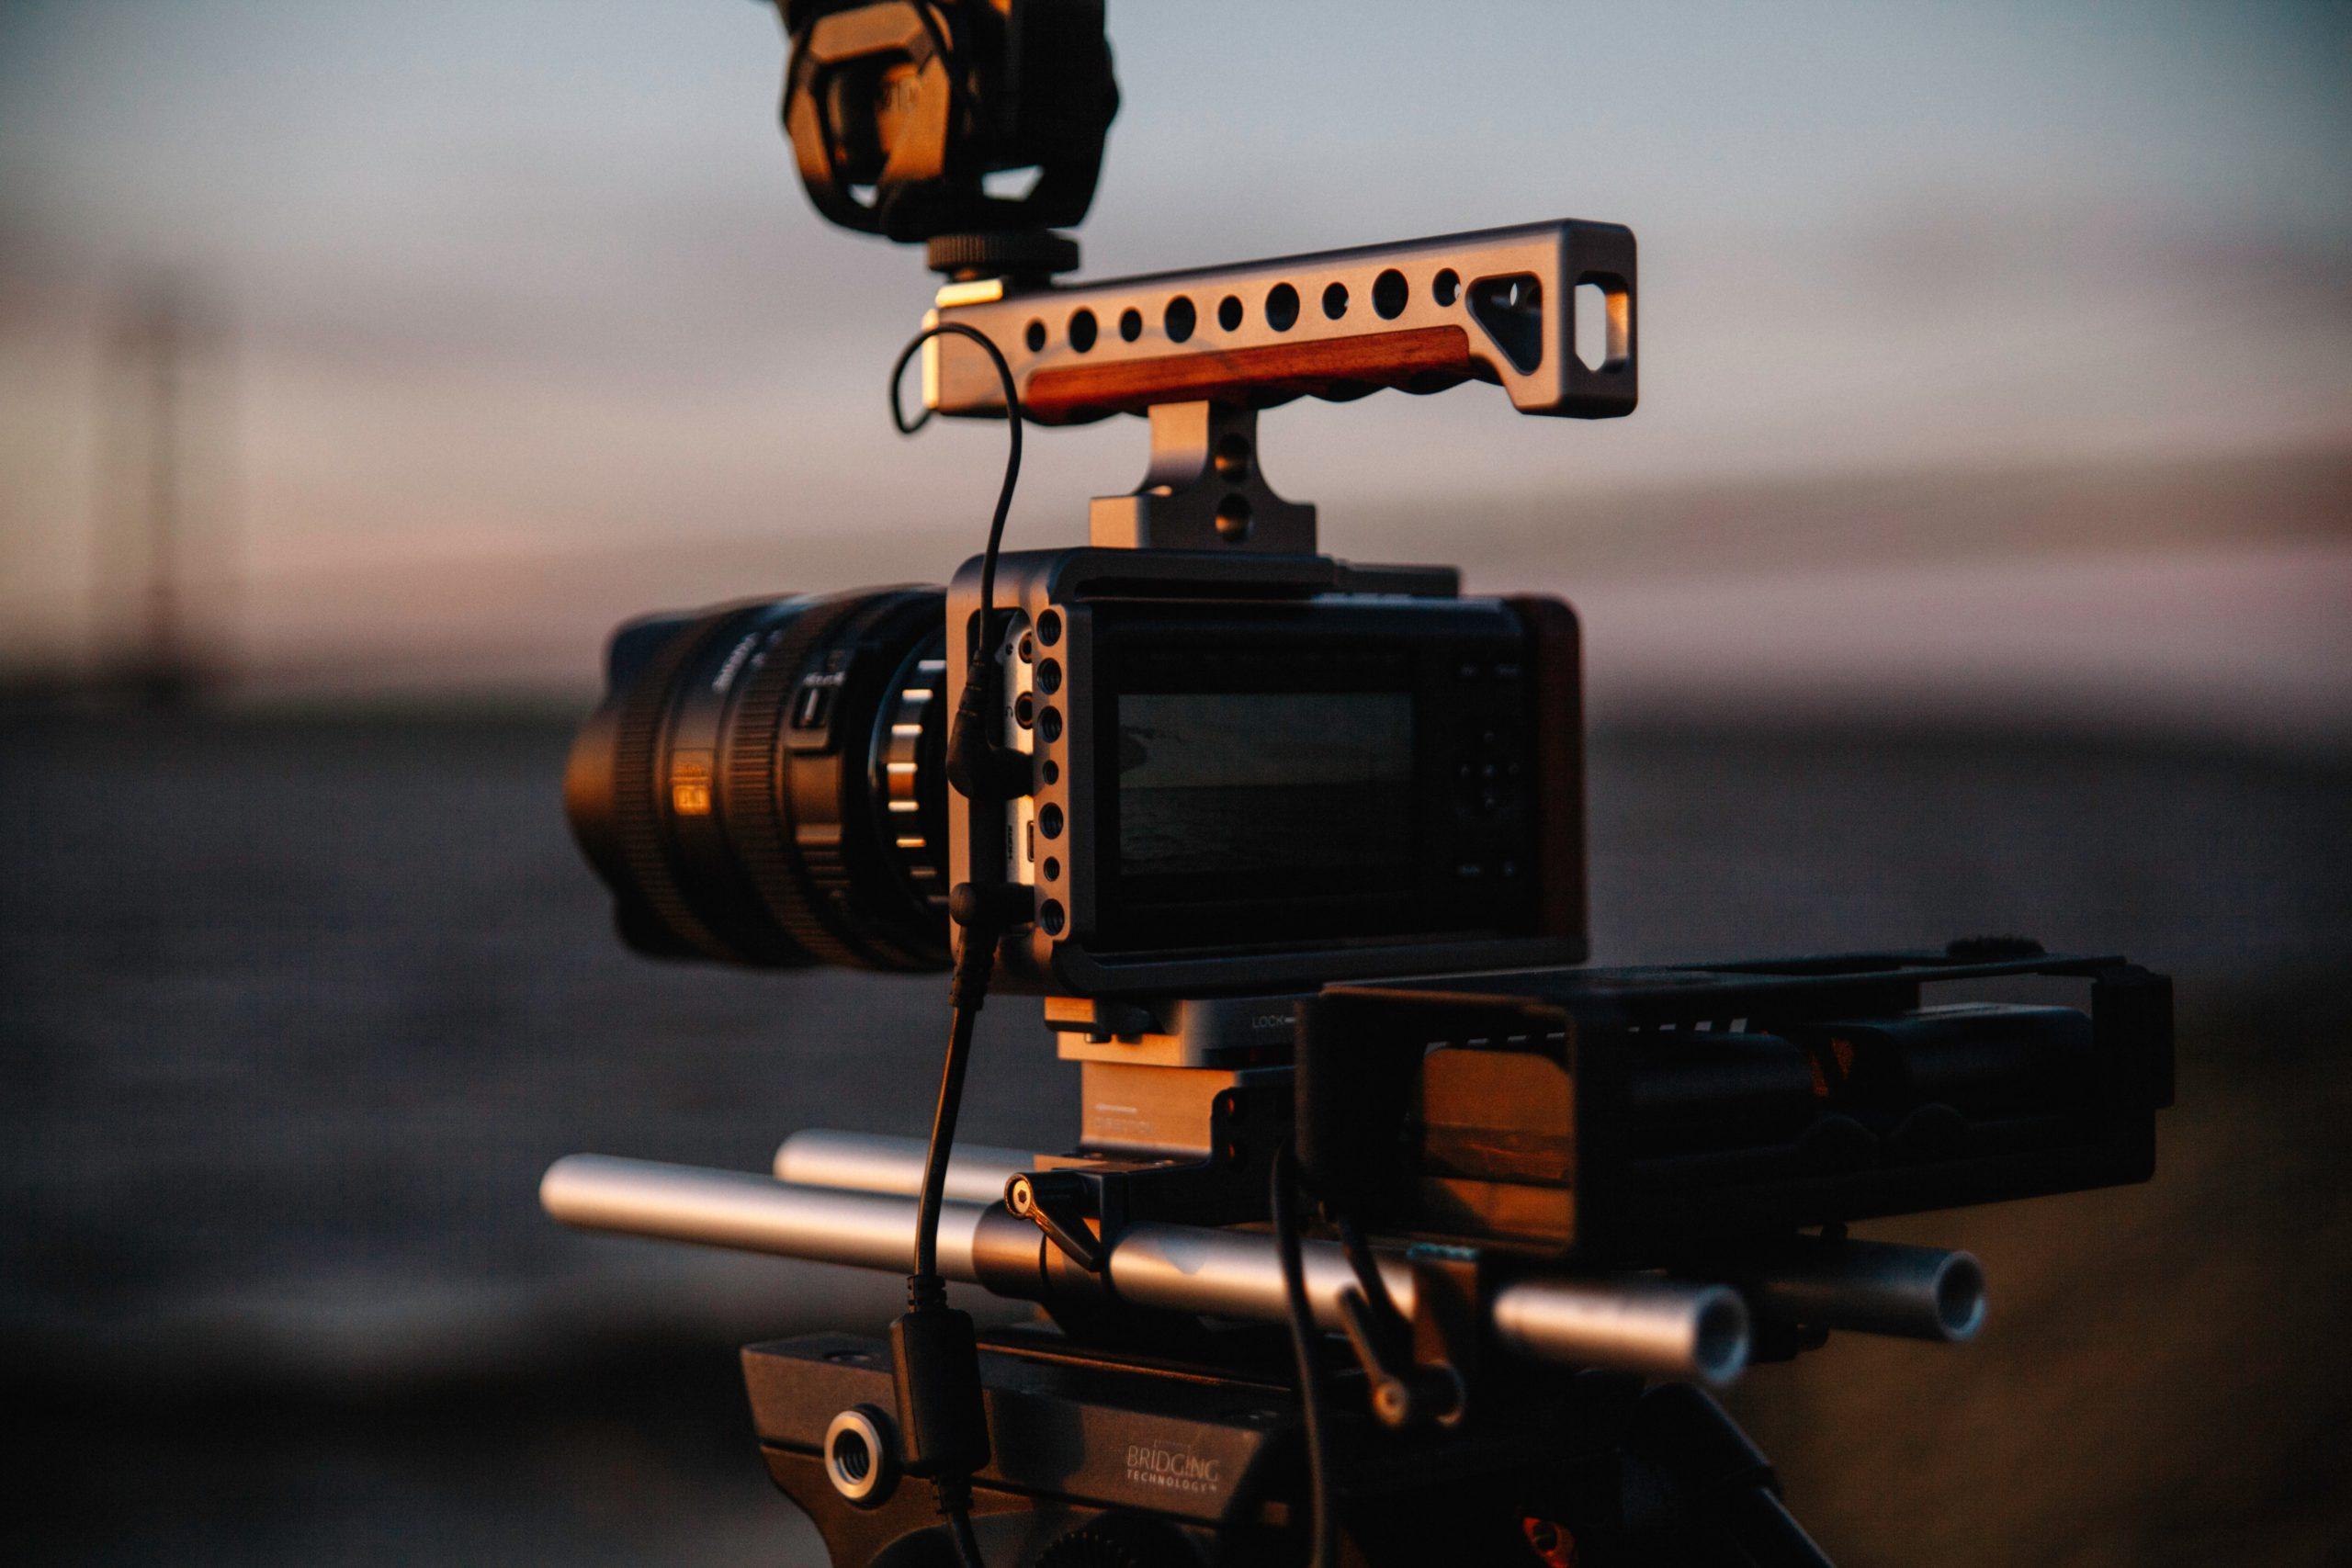 Company Video Manufacturing Is The Toughest Video Manufacturing To Do